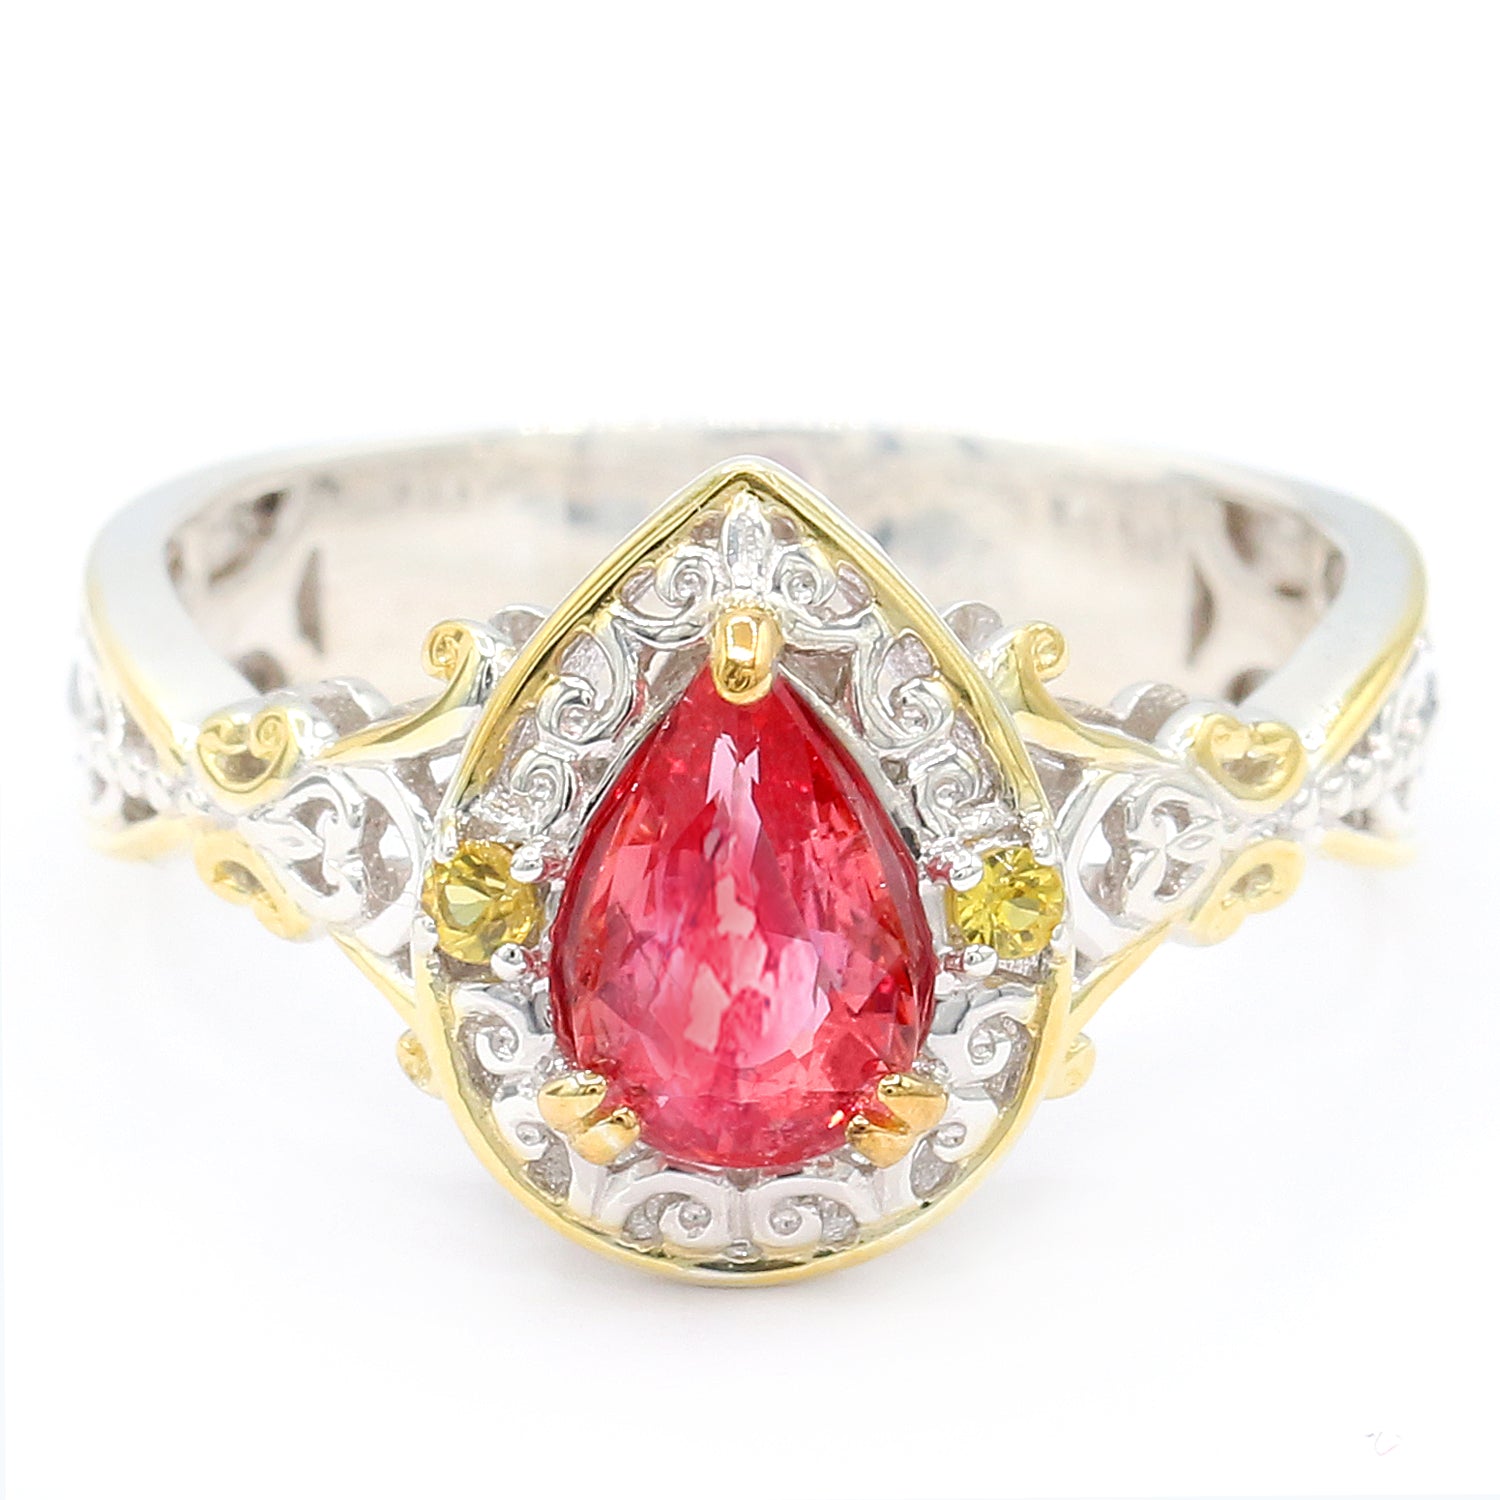 Limited Edition Gems en Vogue Luxe, One-of-a-Kind 1.52ctw Padparadscha Sapphire & Yellow Sapphire Ring